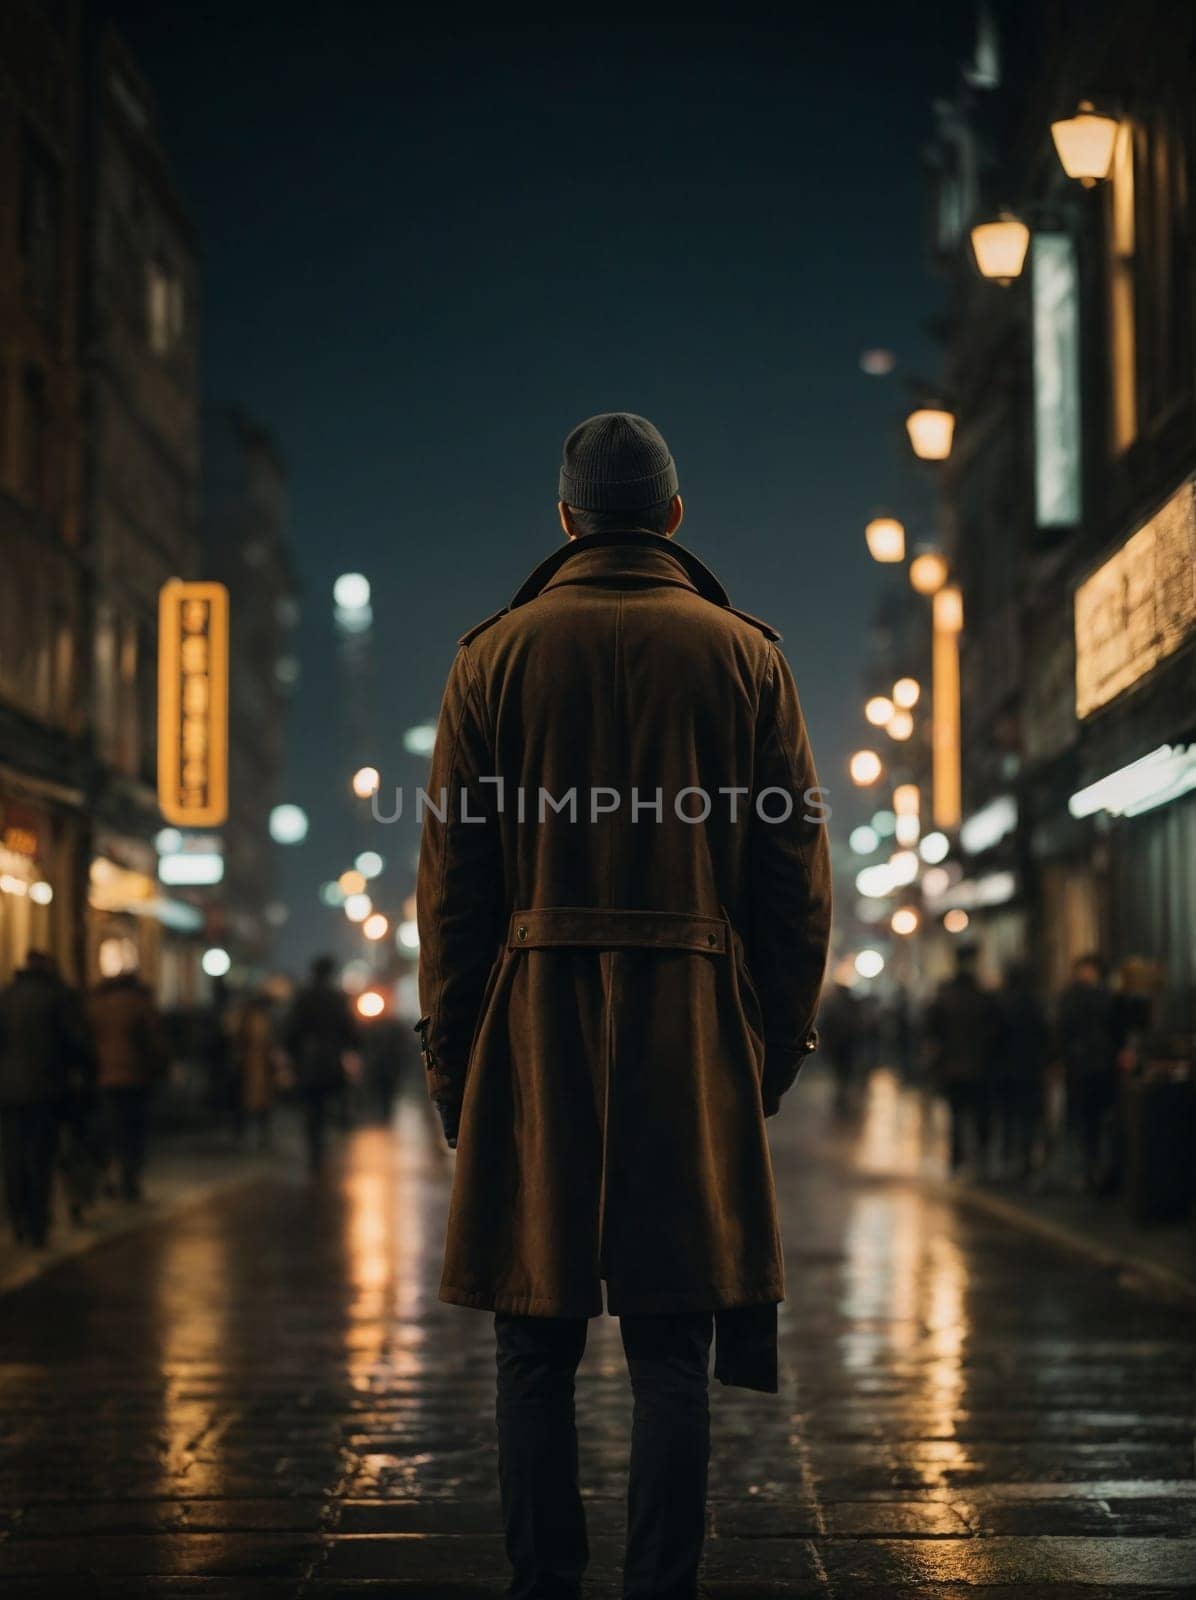 A man walks alone down a dimly lit city street, surrounded by tall buildings and the vibrant night atmosphere.